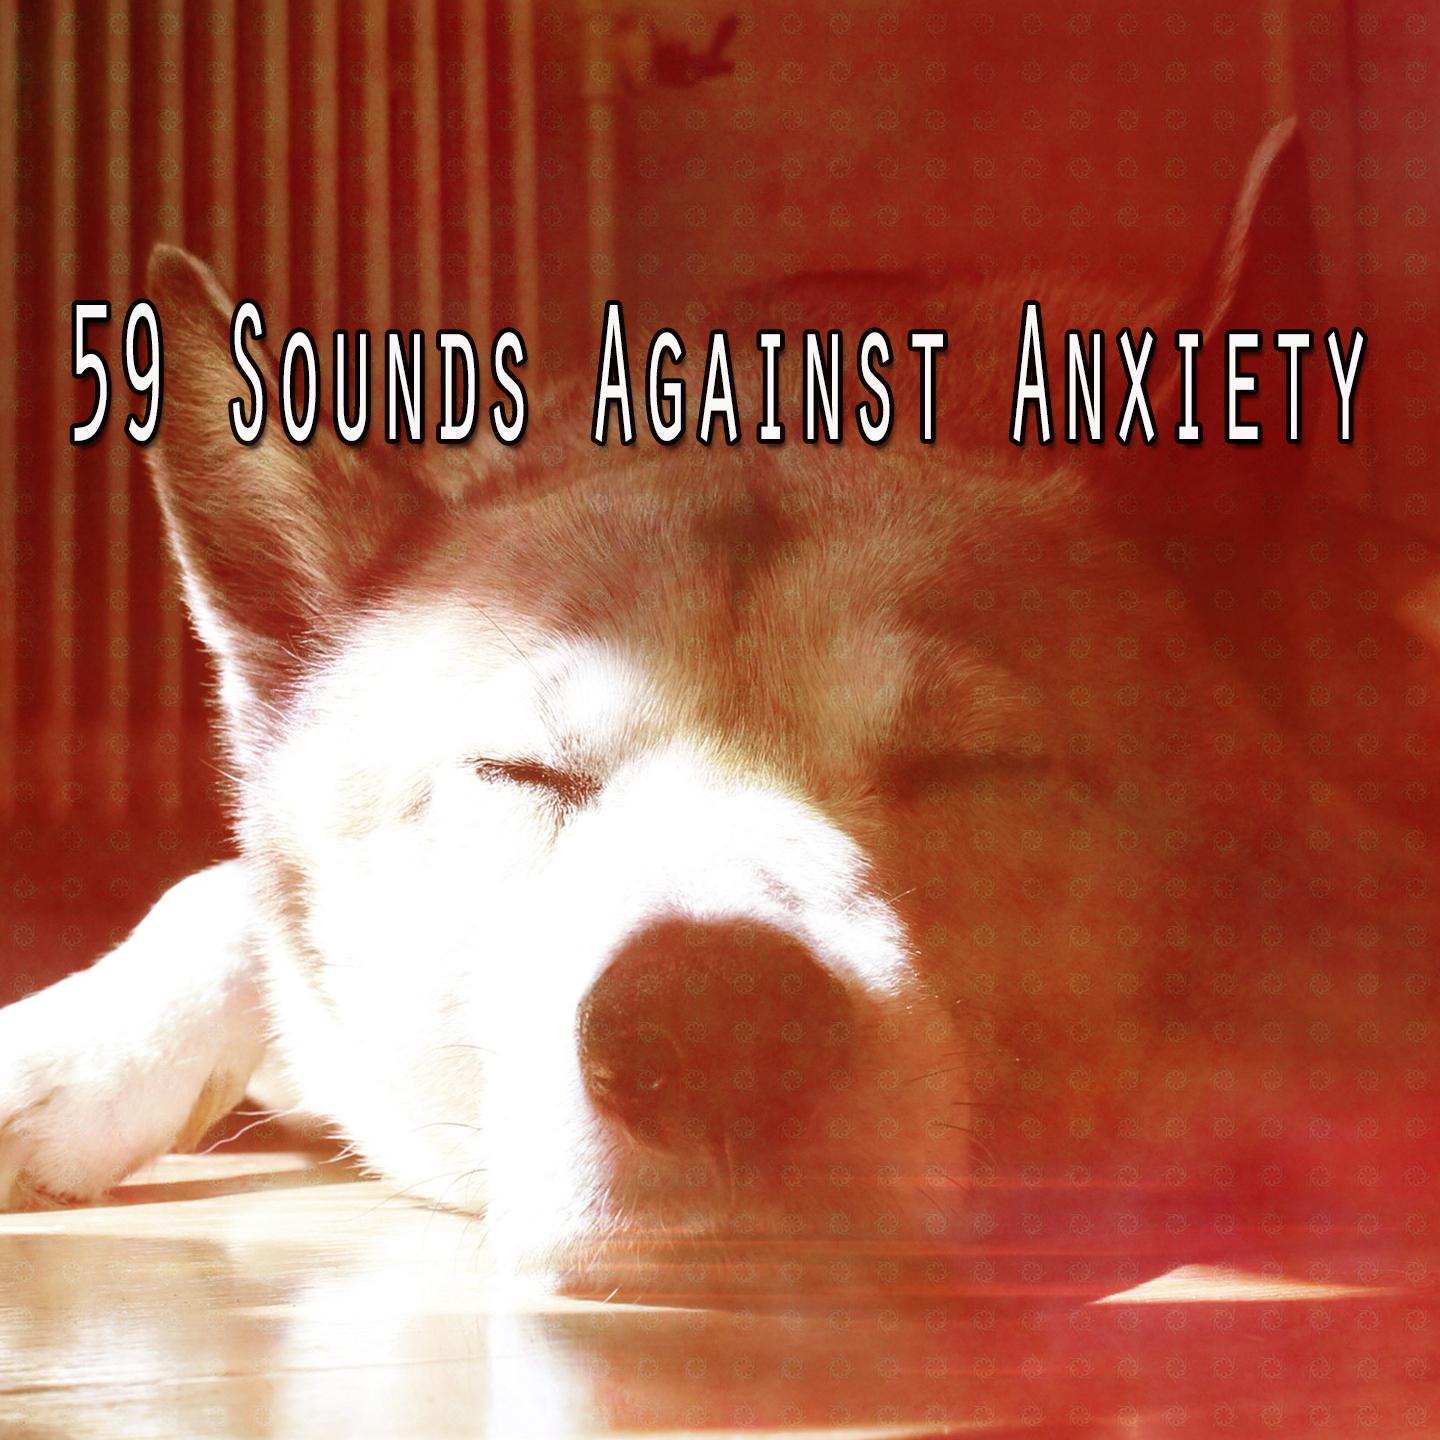 59 Sounds Against Anxiety